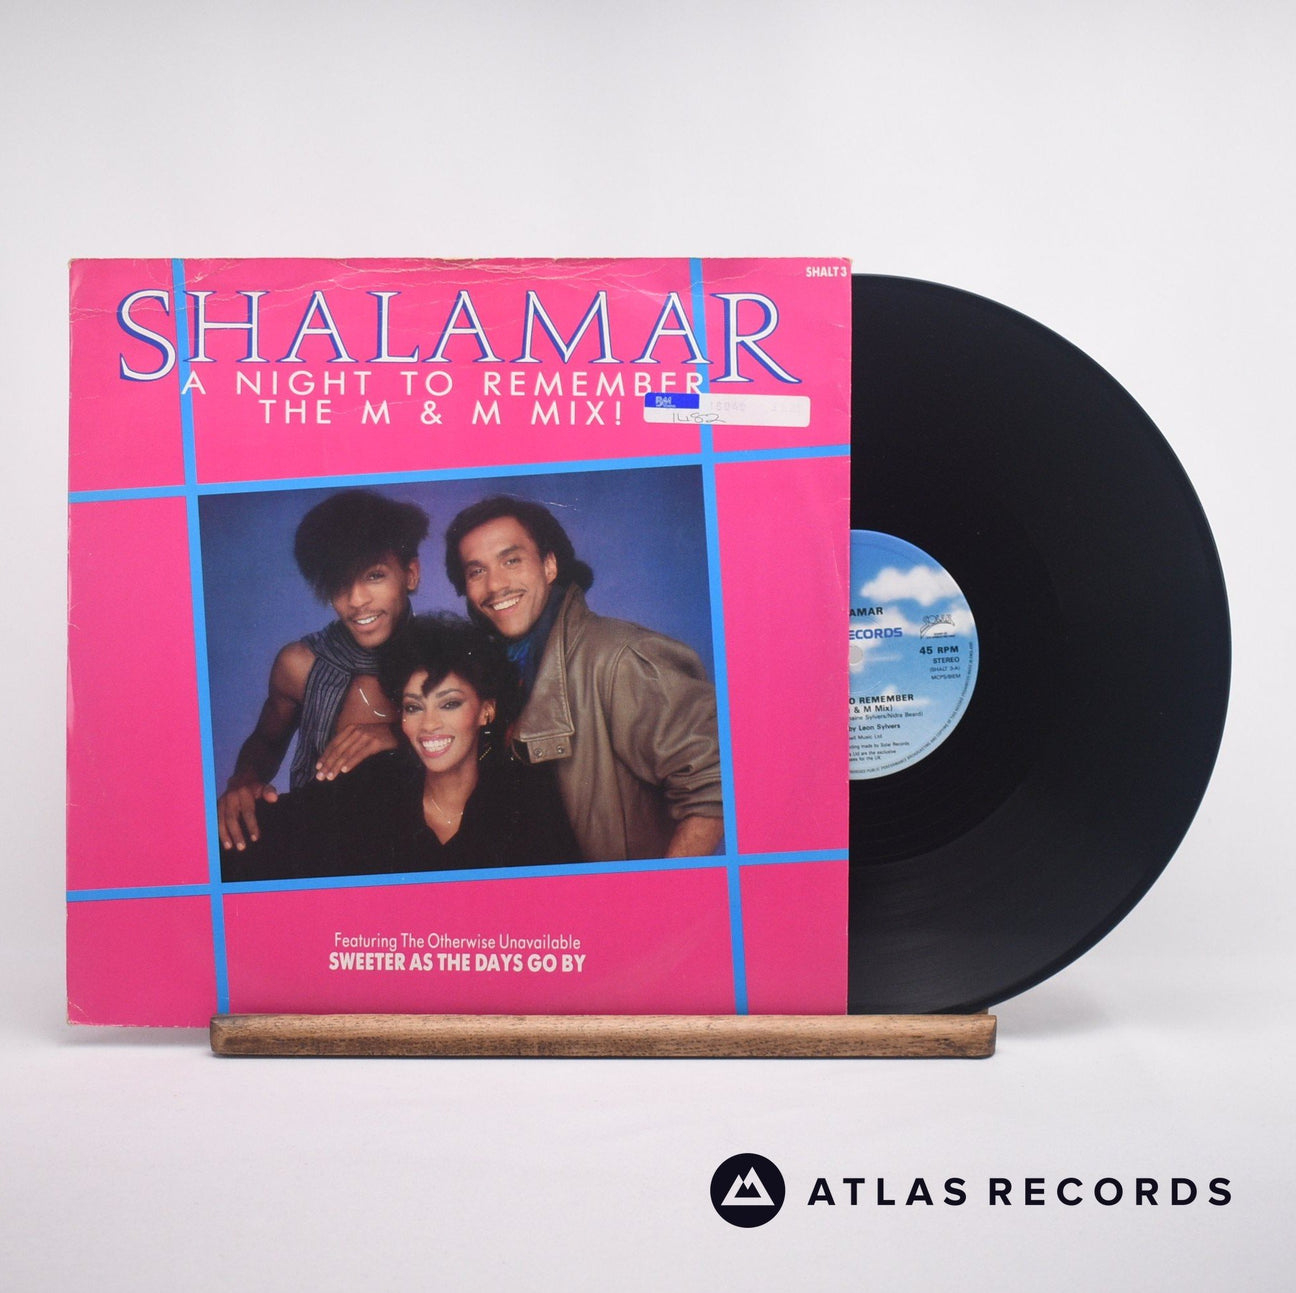 Shalamar A Night To Remember 12" Vinyl Record - In Sleeve